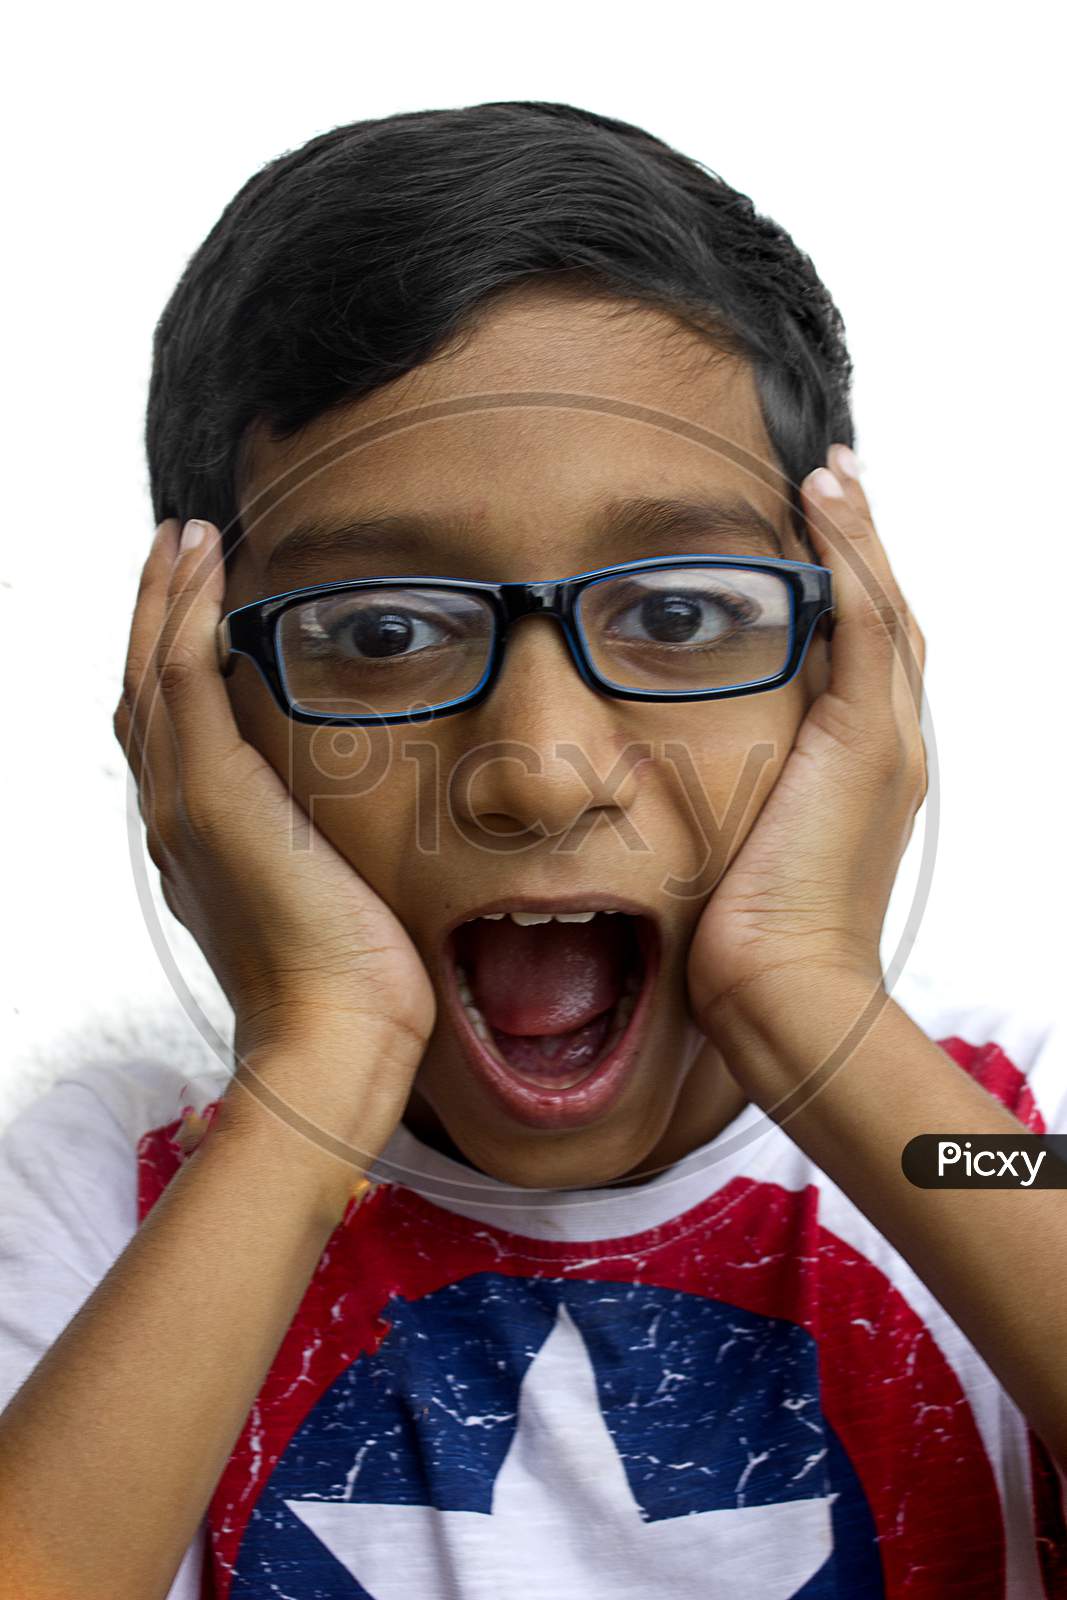 Portrait of a Young Indian Boy with Shouting Expression